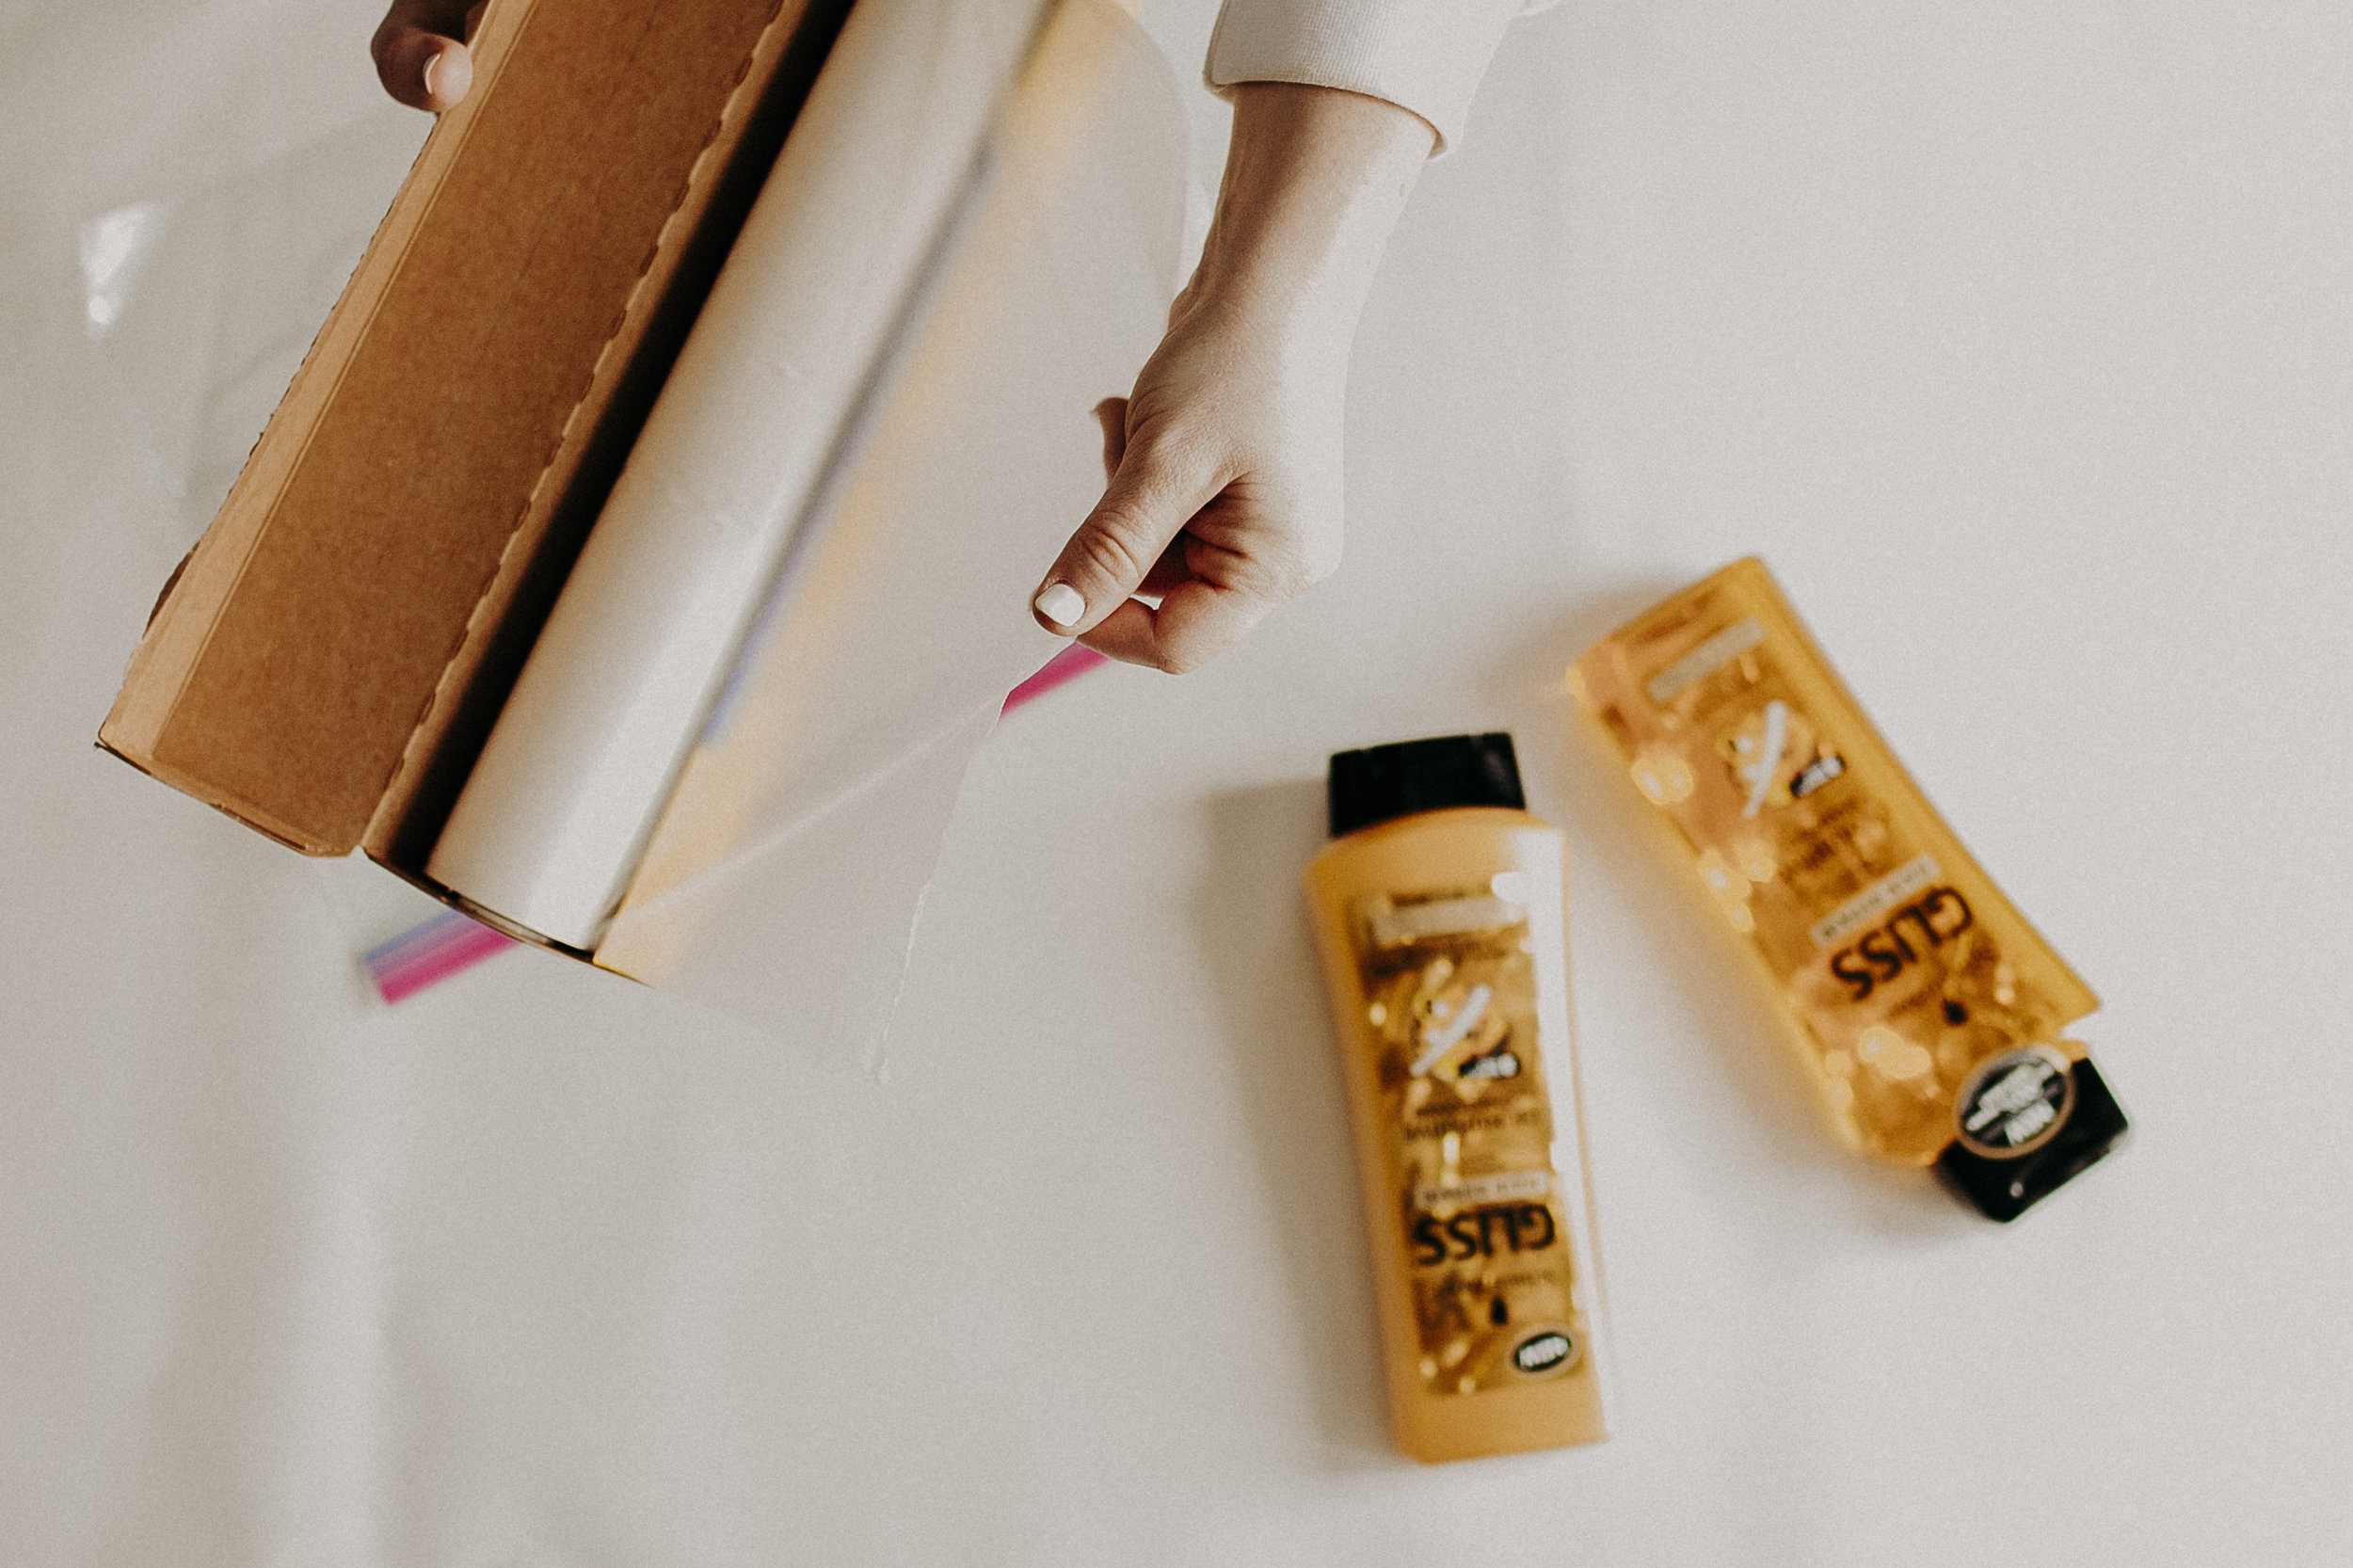  My second tip is how to properly pack your haircare products. There's almost nothing worse than starting a trip, only to realize your shampoo has exploded during flight. You can easily prevent that from happening by applying some plastic food wrap o